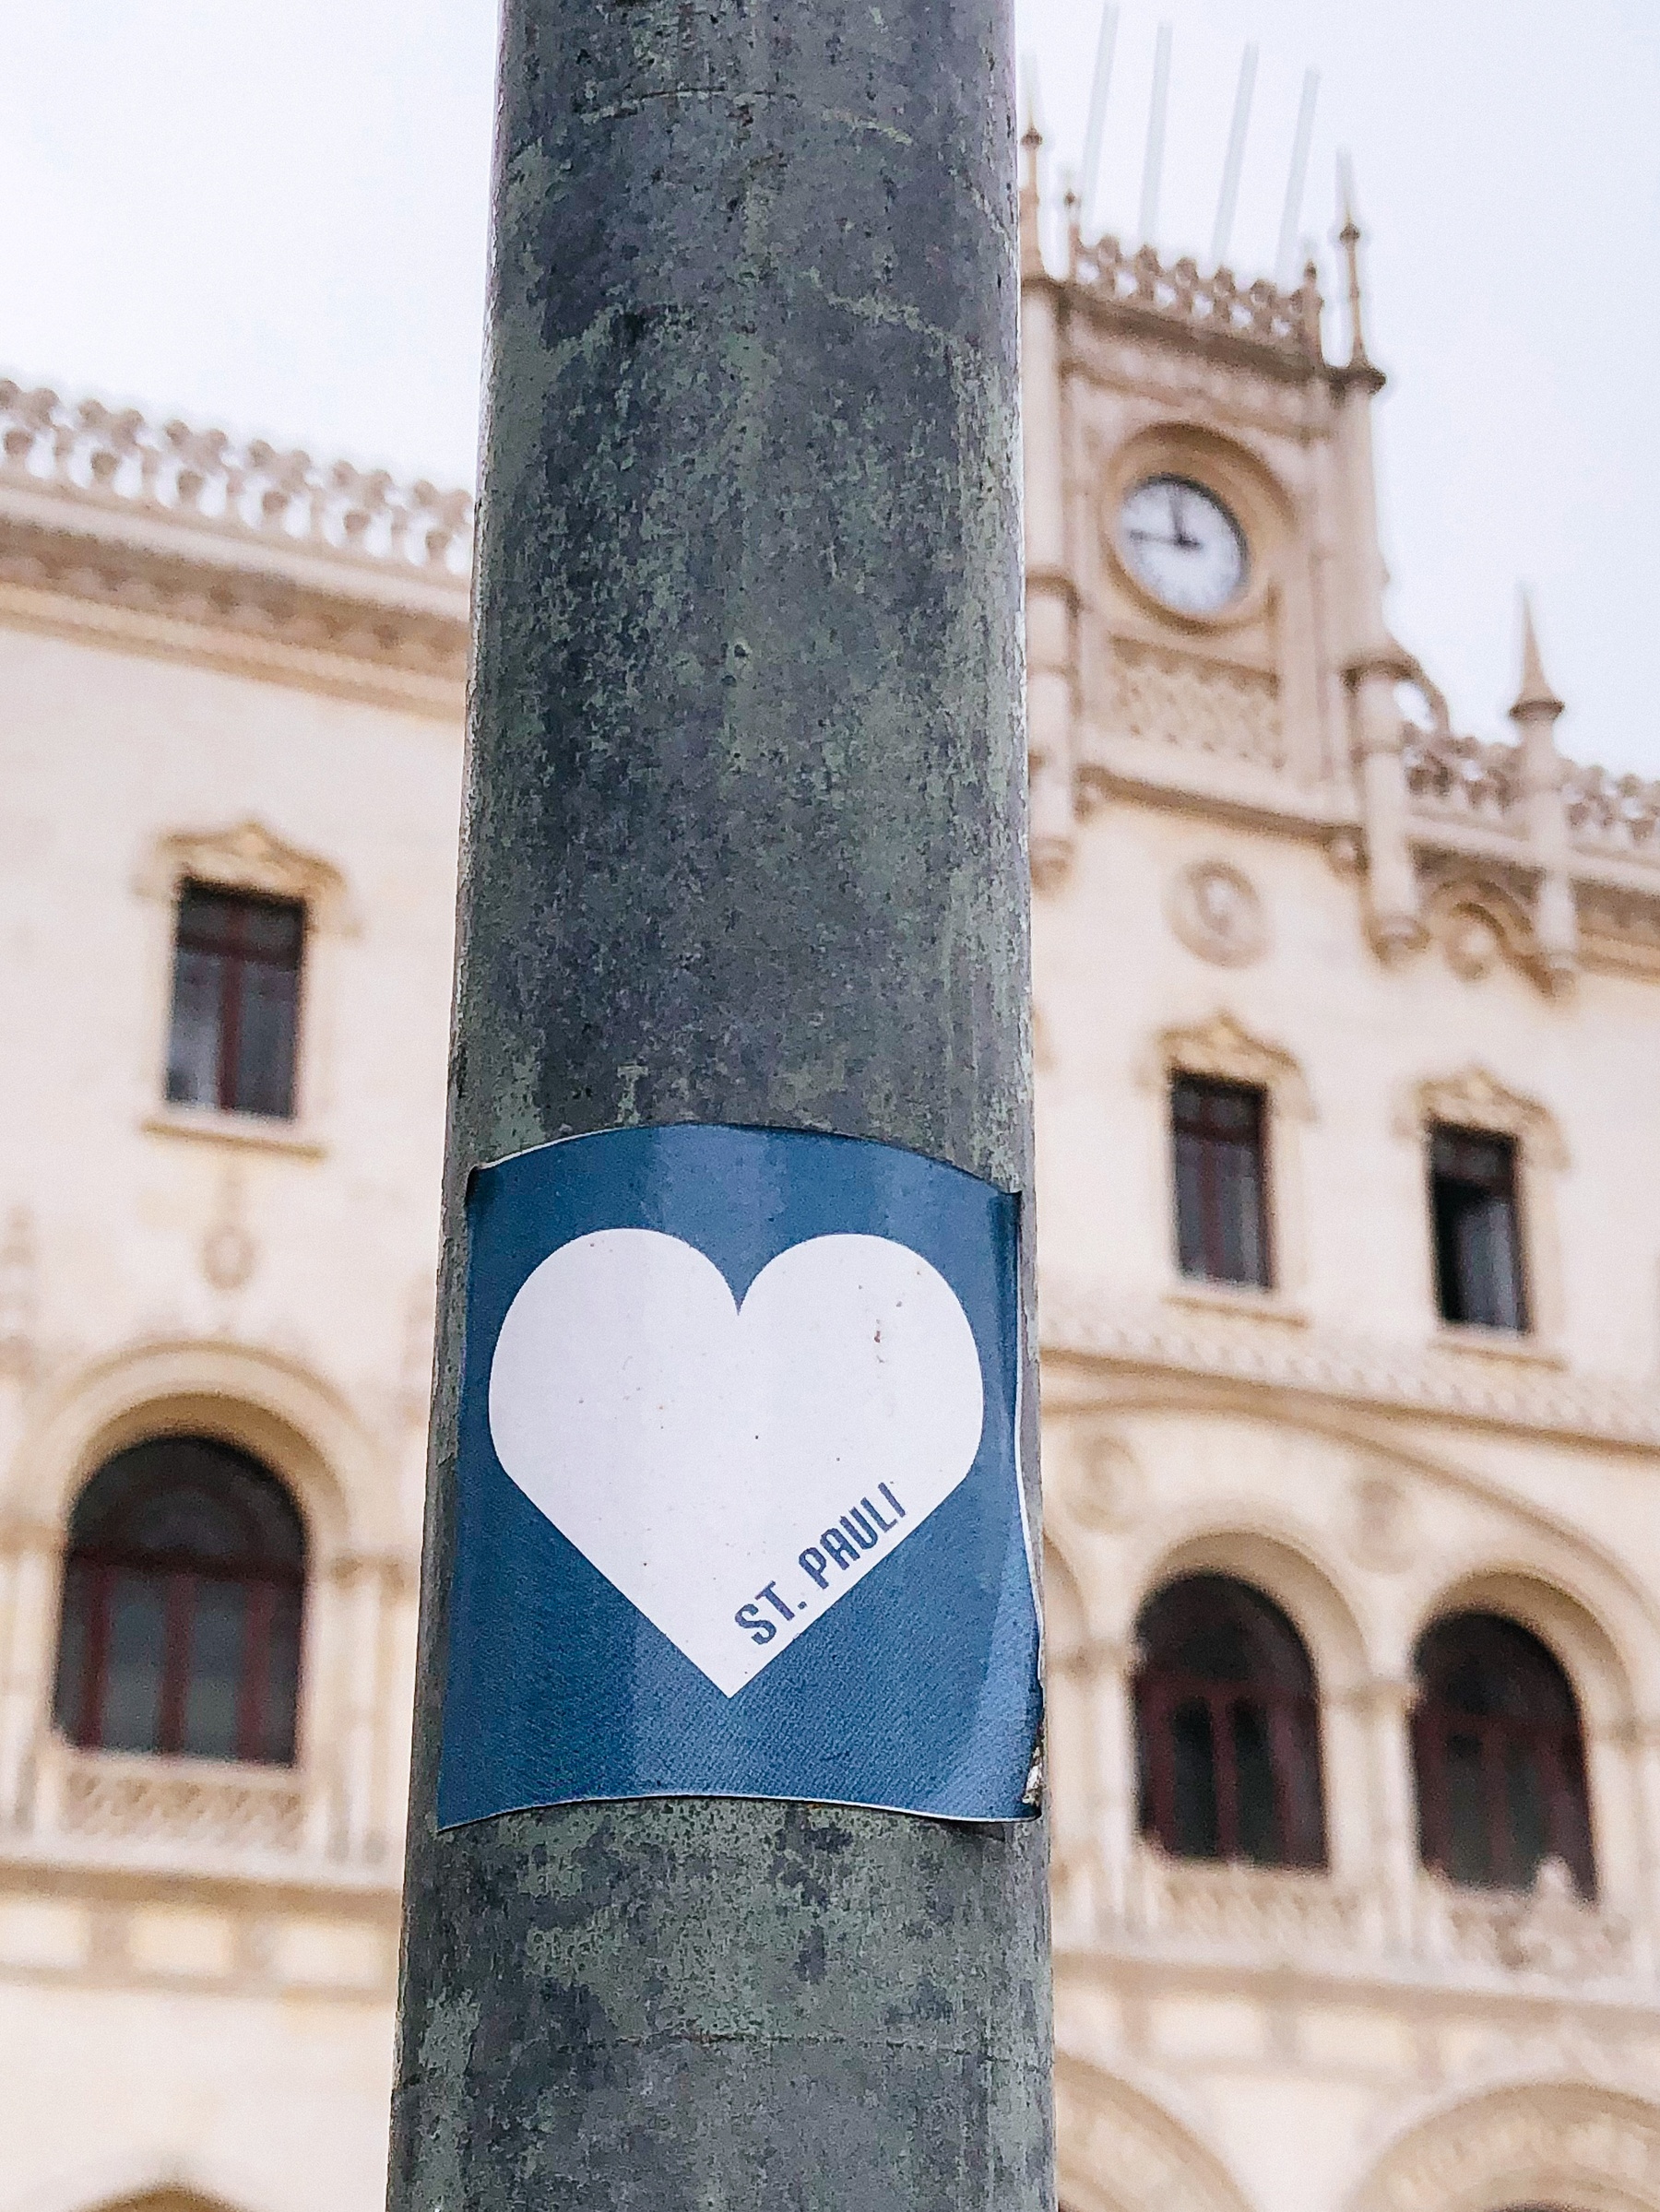 Sticker of a heart with the words “St. Pauli”, and a cool classic building in the background.  